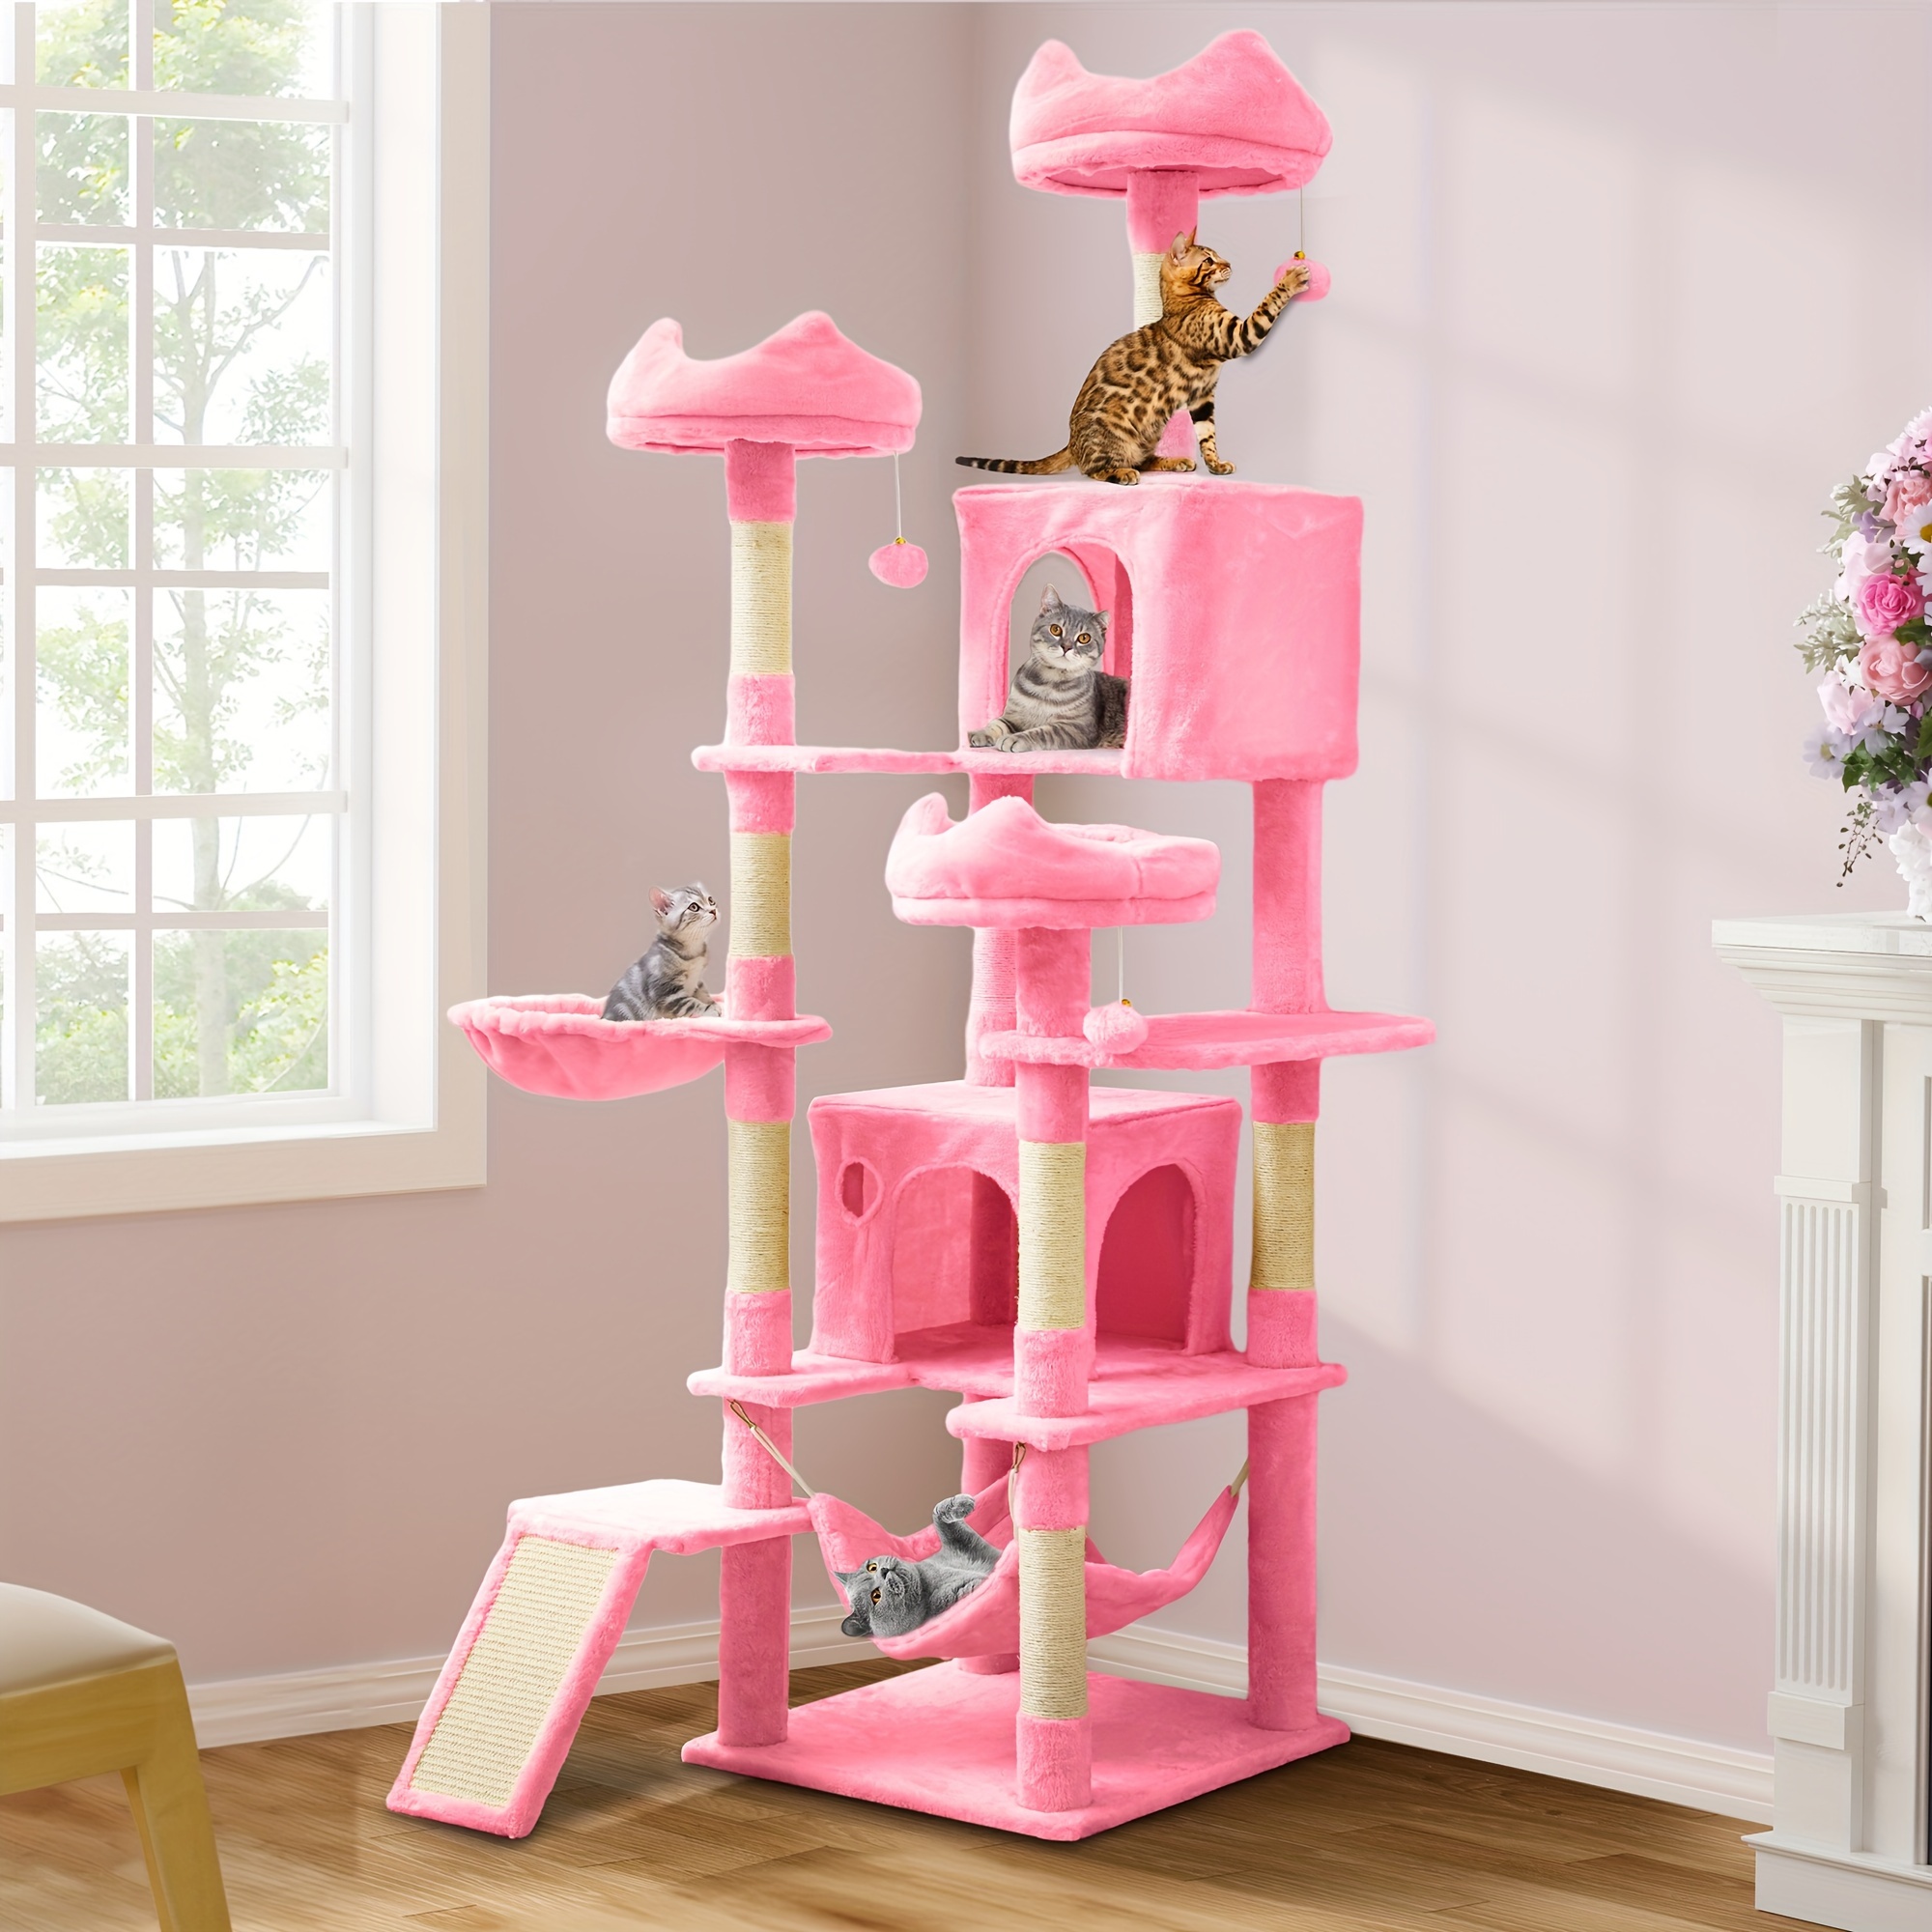 

Yarsca Cat Tree Tower For Indoor Cats, 75 Inches Tall Multi-level Cat Climbing Tower With Cat Condos, Cozy Plush Perches, Hammocks, Scratching Posts Board, Large Cat Activity Center